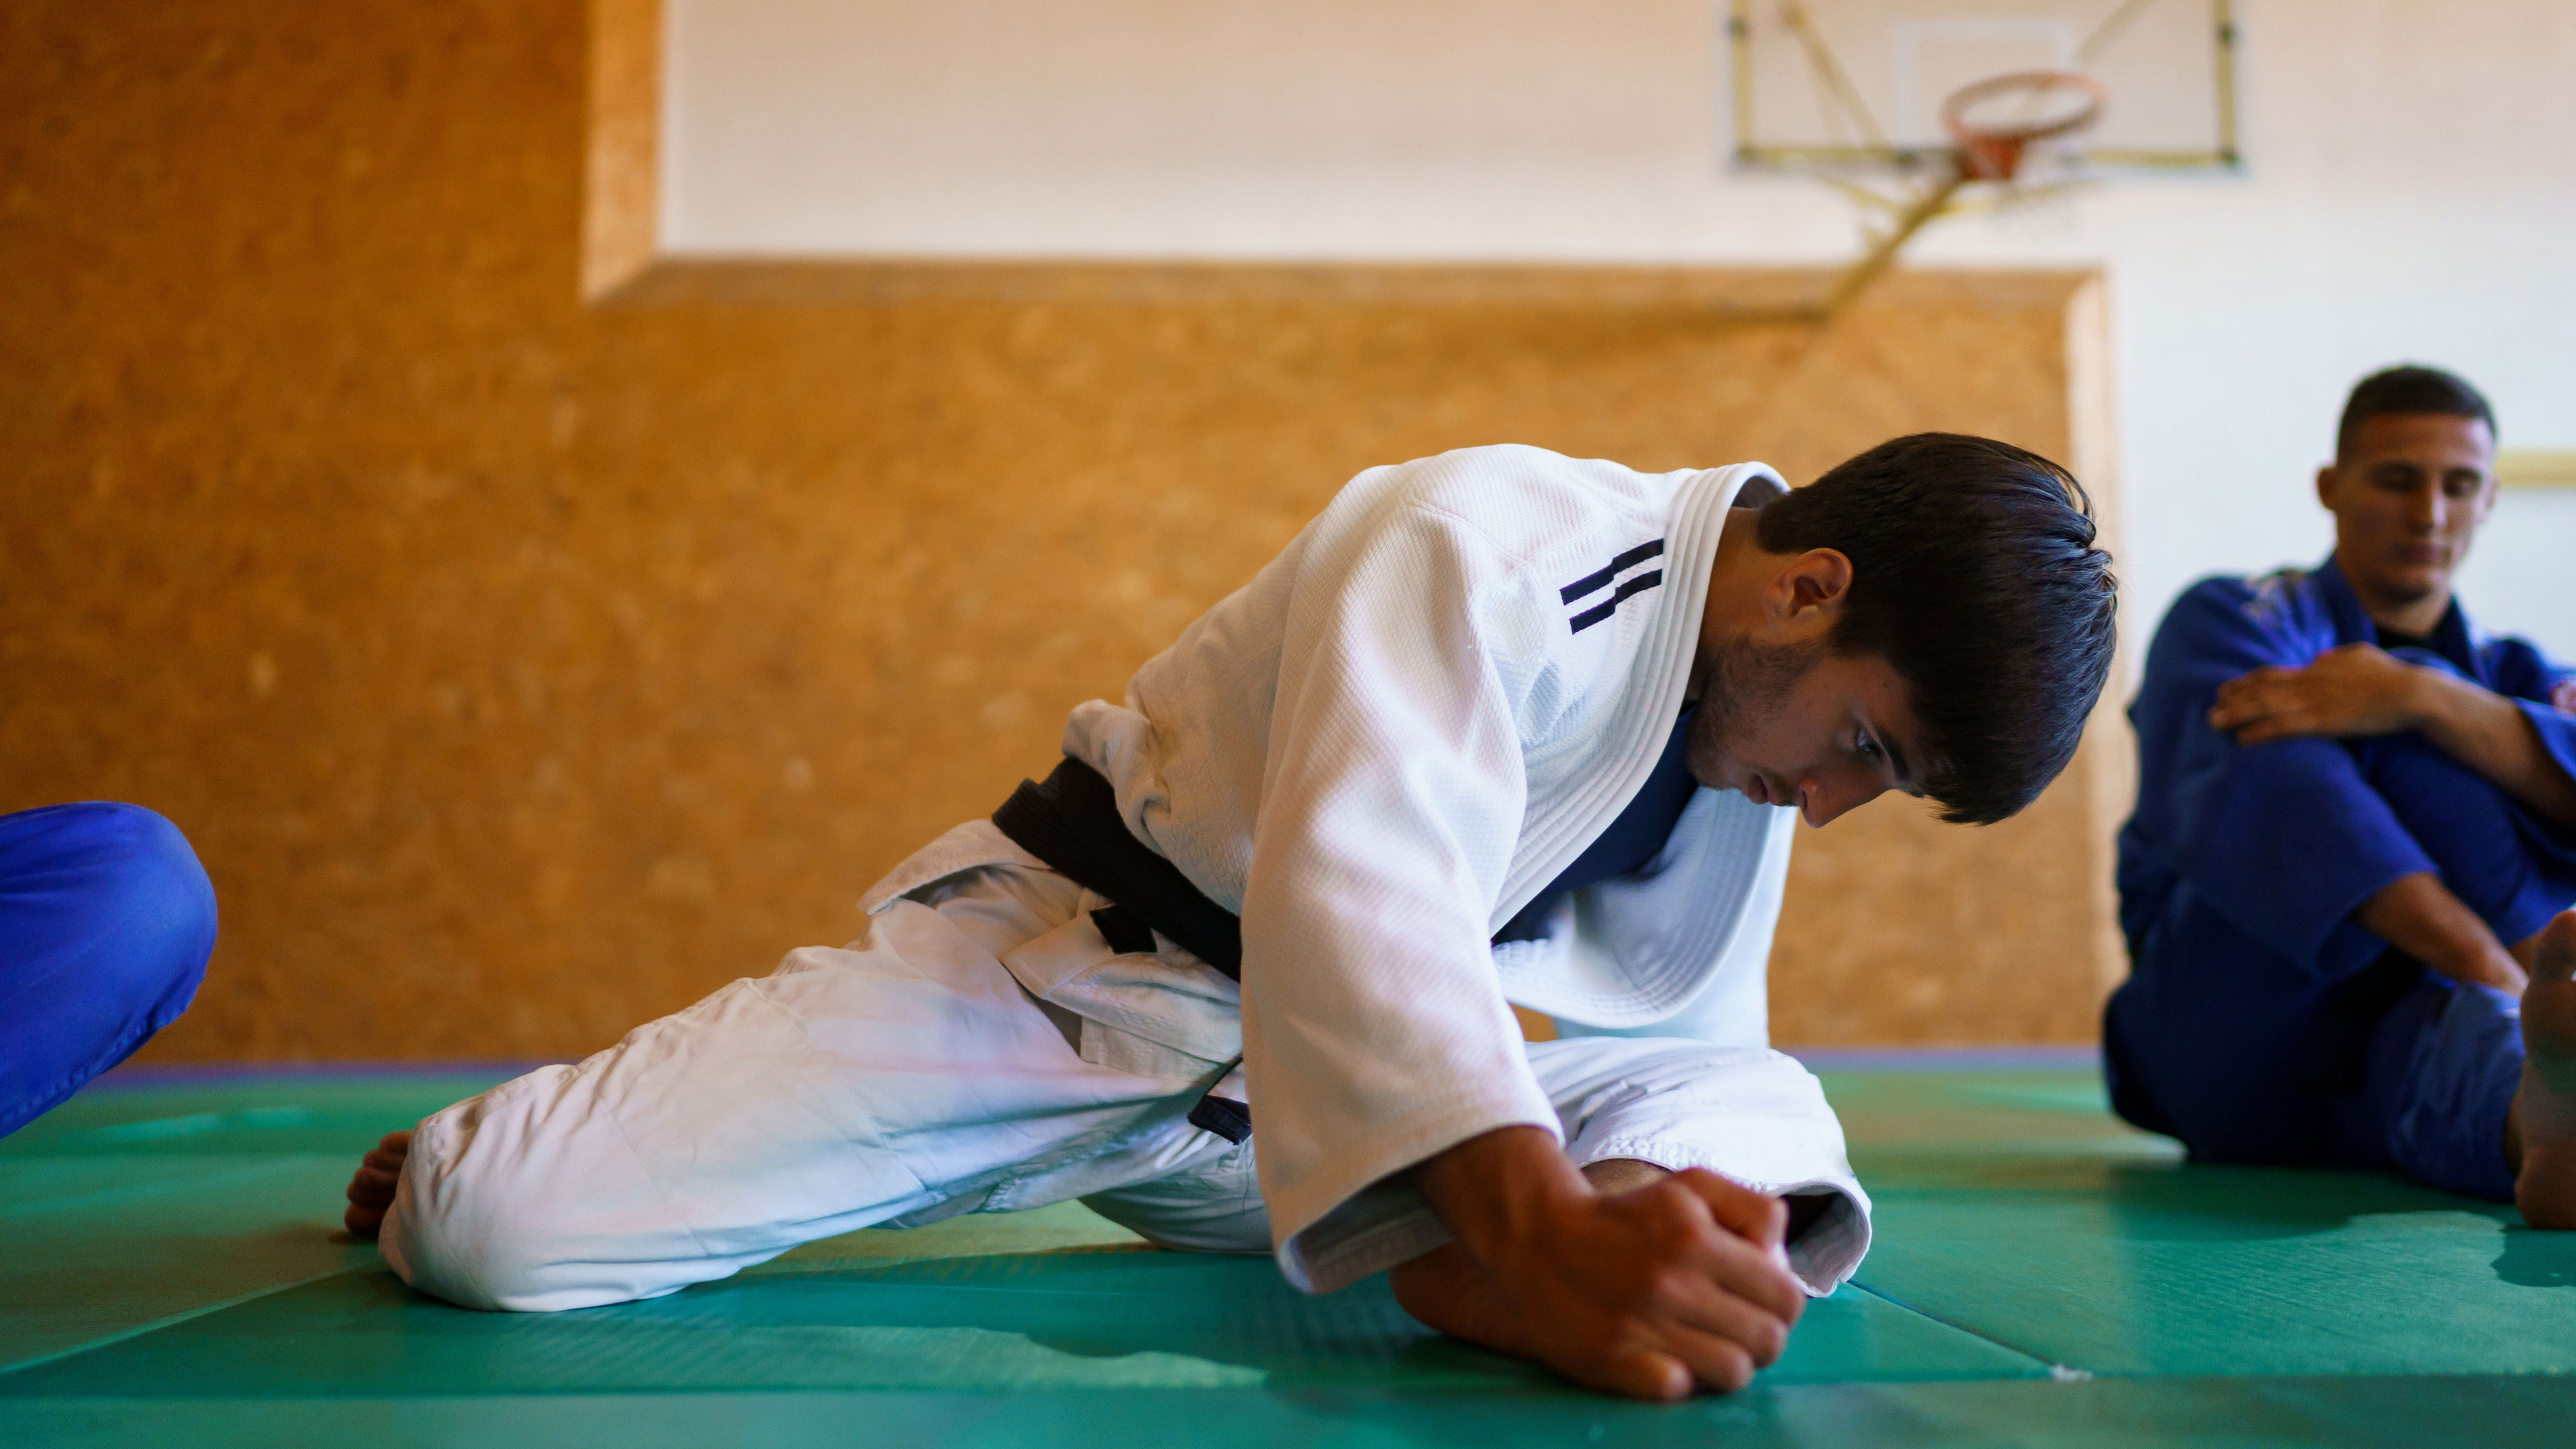 i took up martial arts in my 40s, and it totally changed my approach to fitness